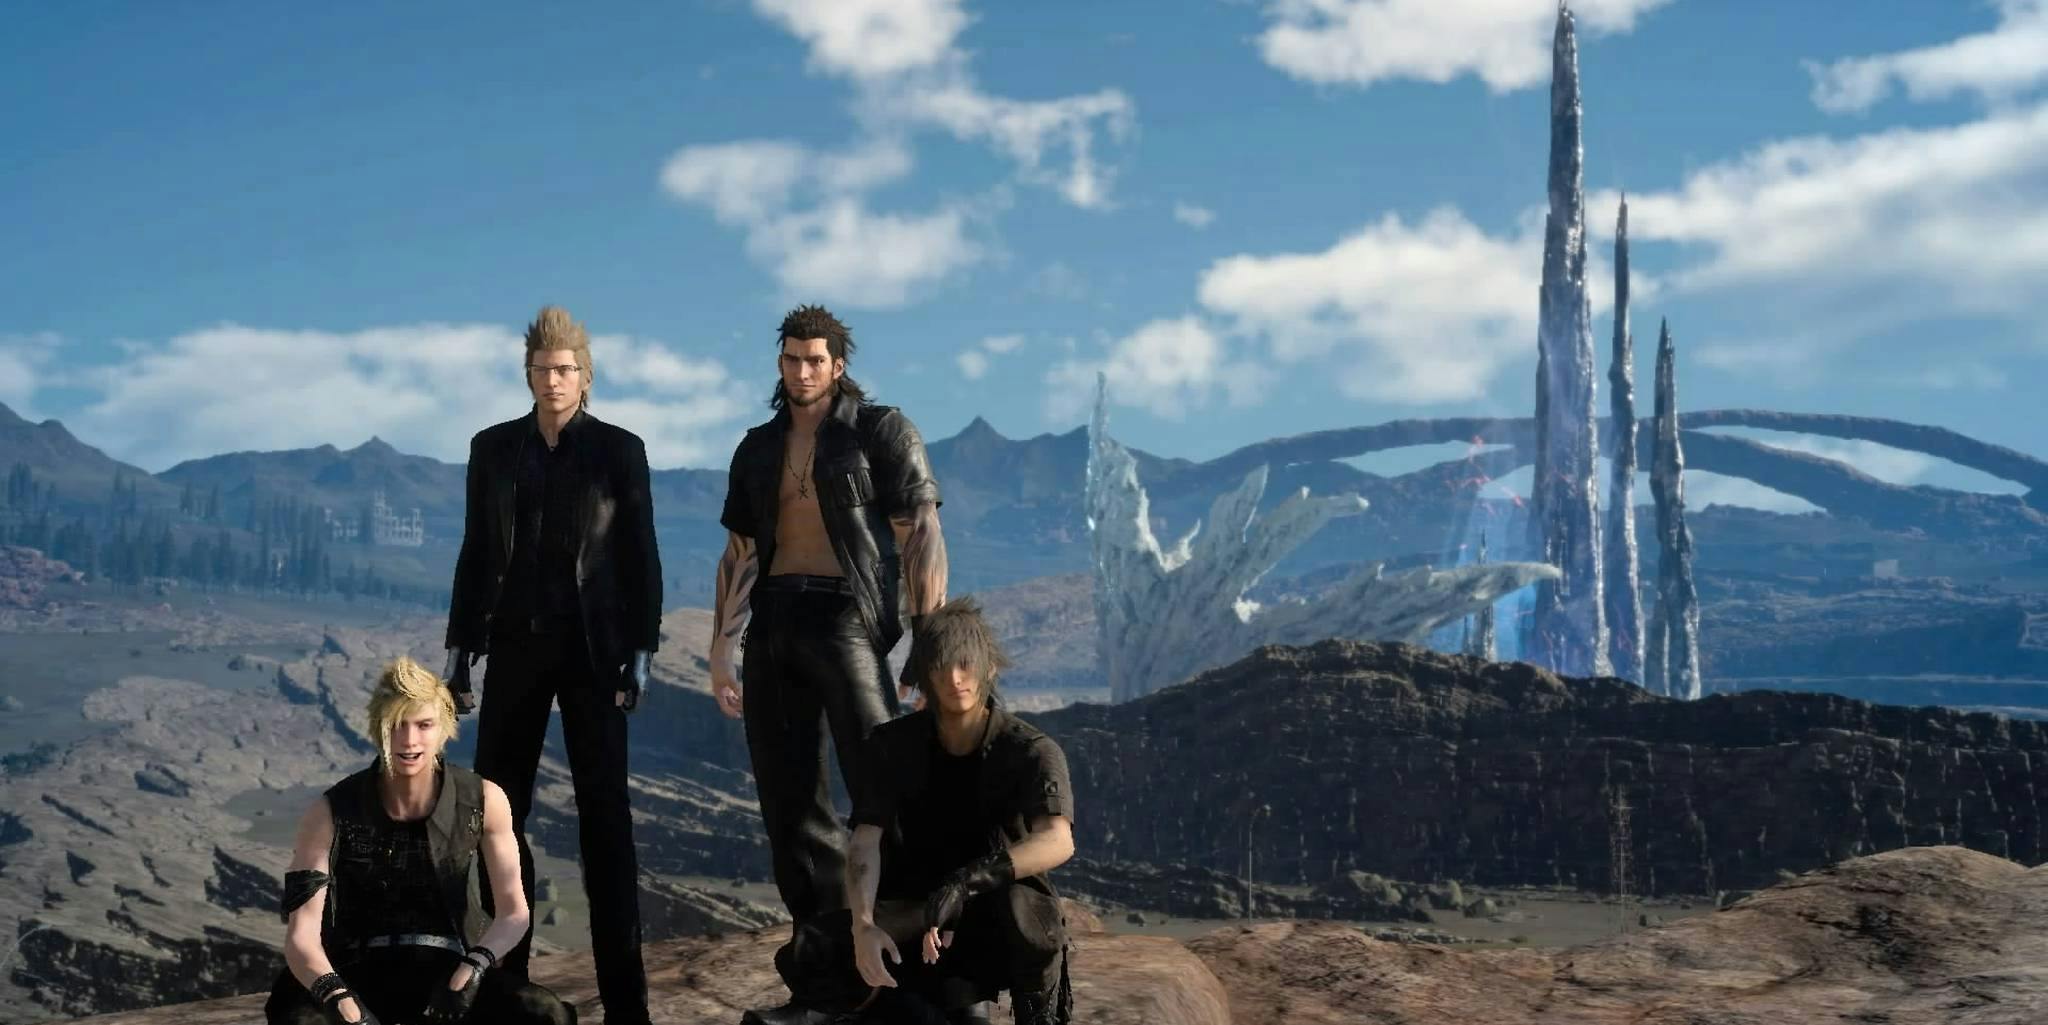 Has Brotherhood Final Fantasy XV lived up to fan's expectations?